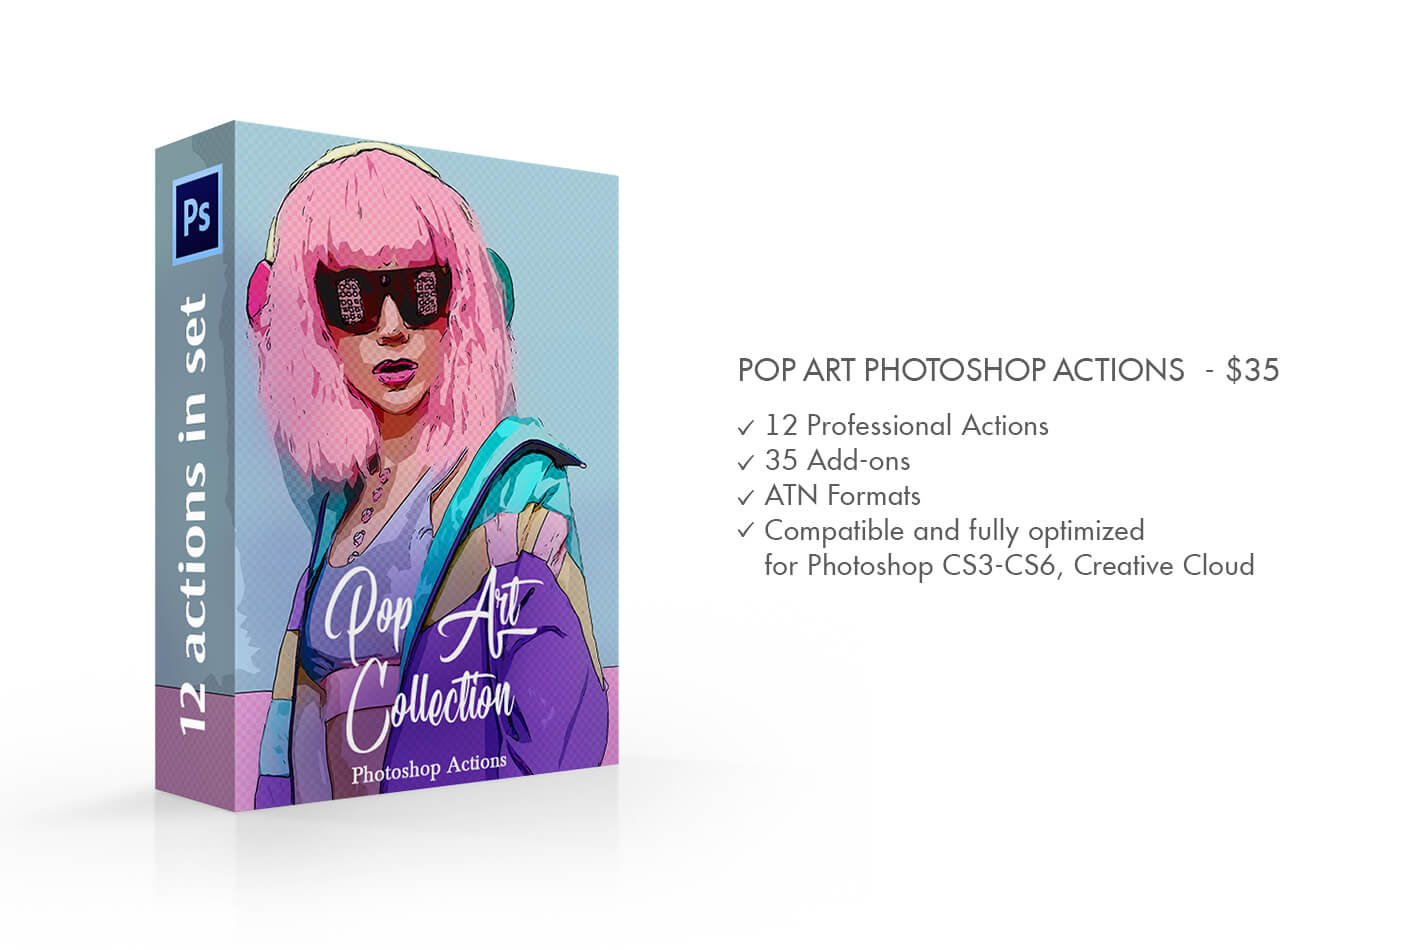 Pop Art Actions Photoshoppreview image.